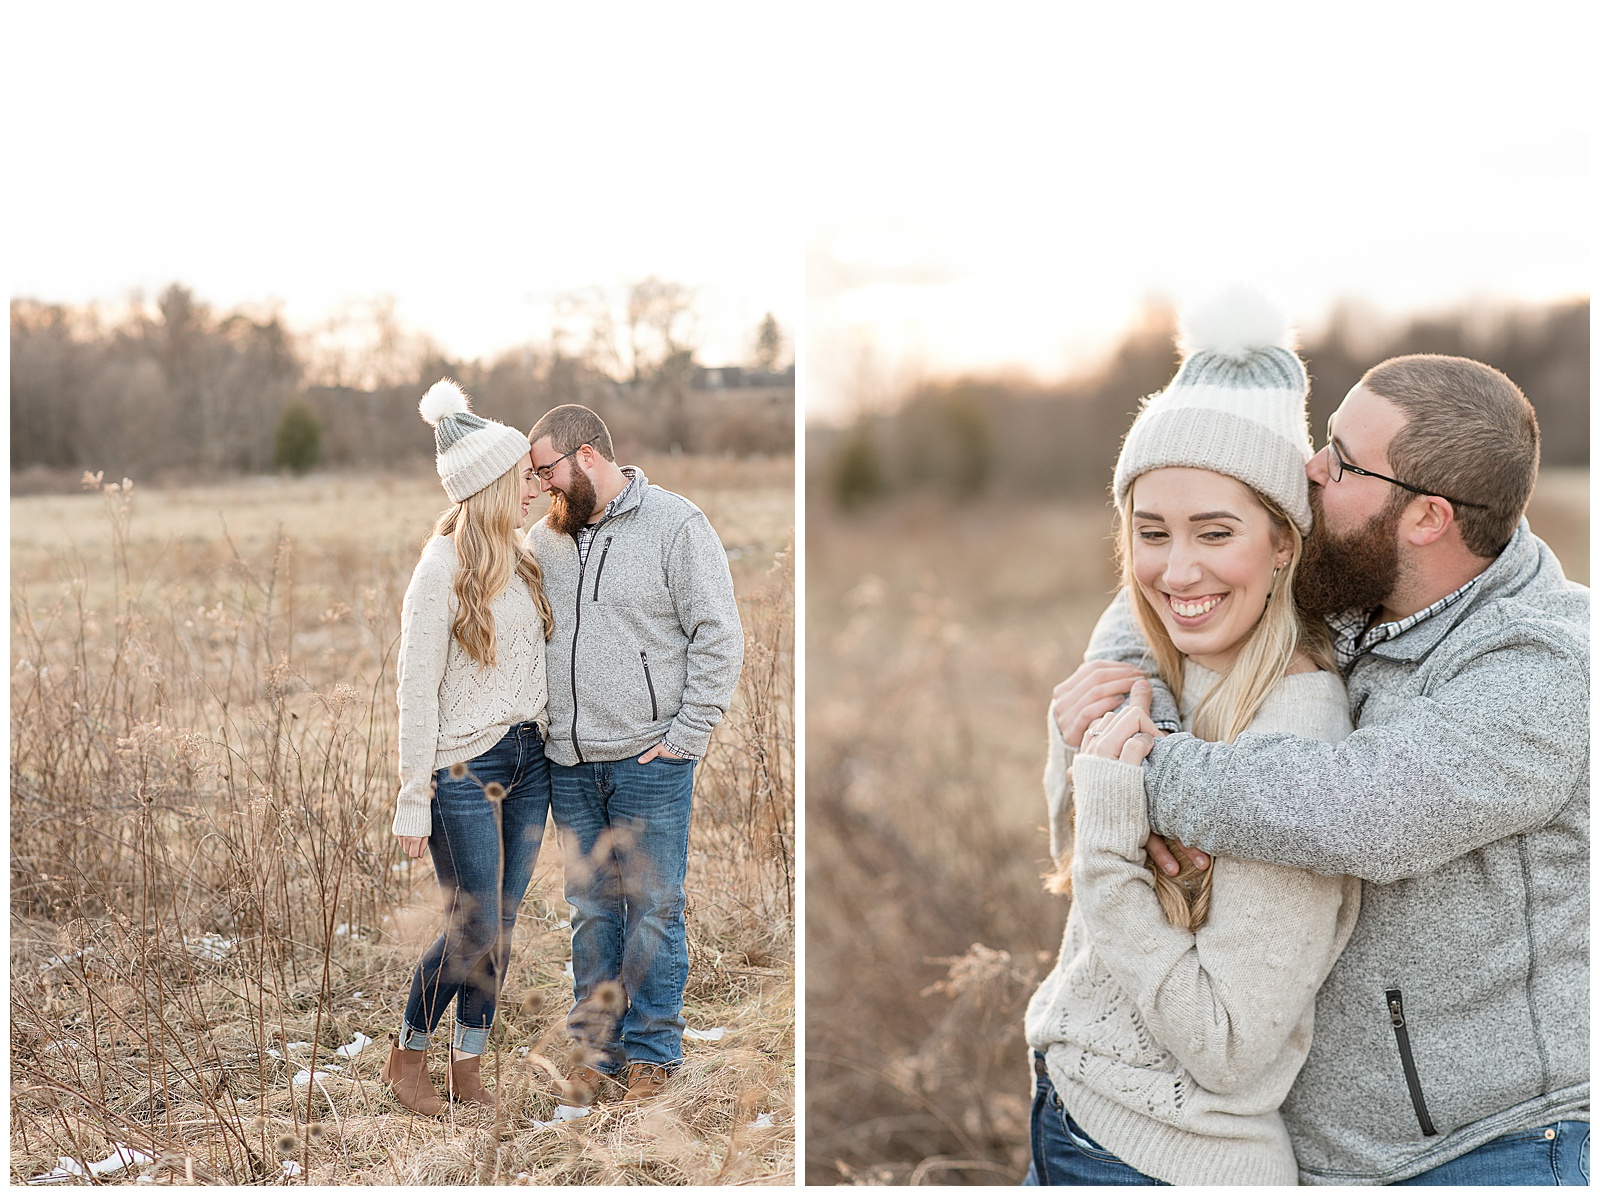 couple in a field of tall grasses, girl has on white winter hat